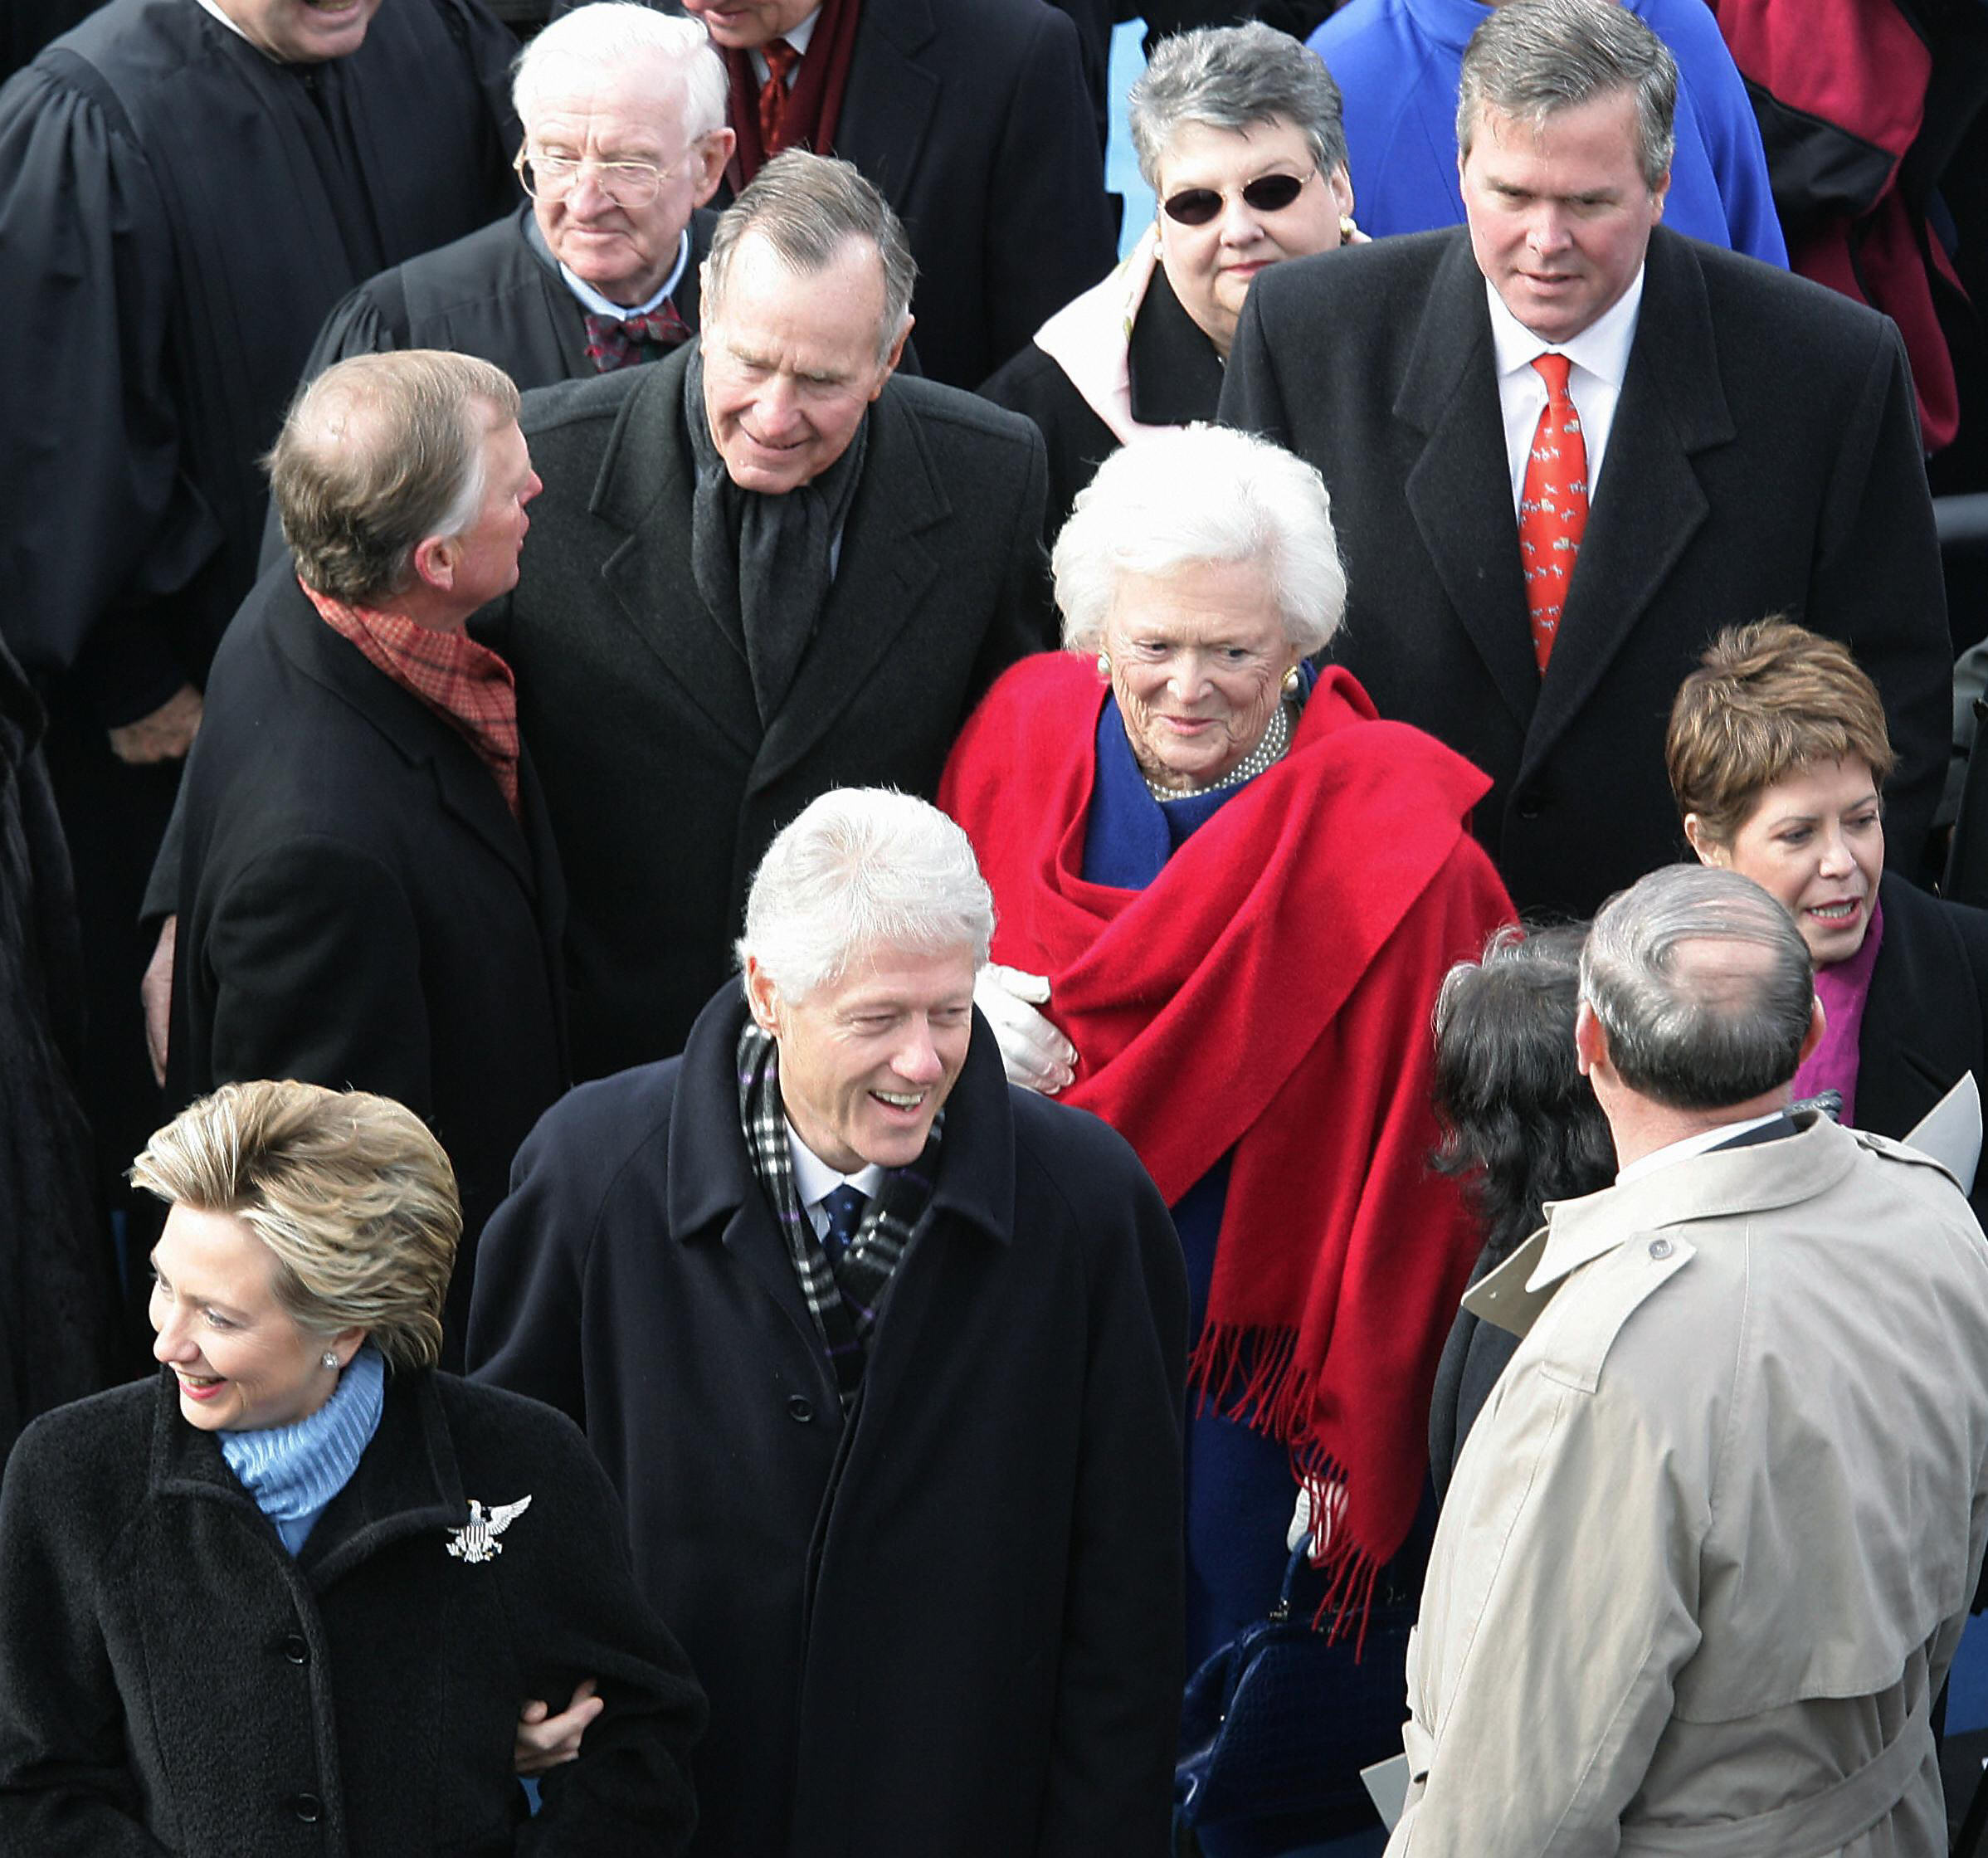 2005 inaugural ceremonies at the U.S. Capitol in Washington, D.C. (DON EMMERT—AFP/Getty Images)